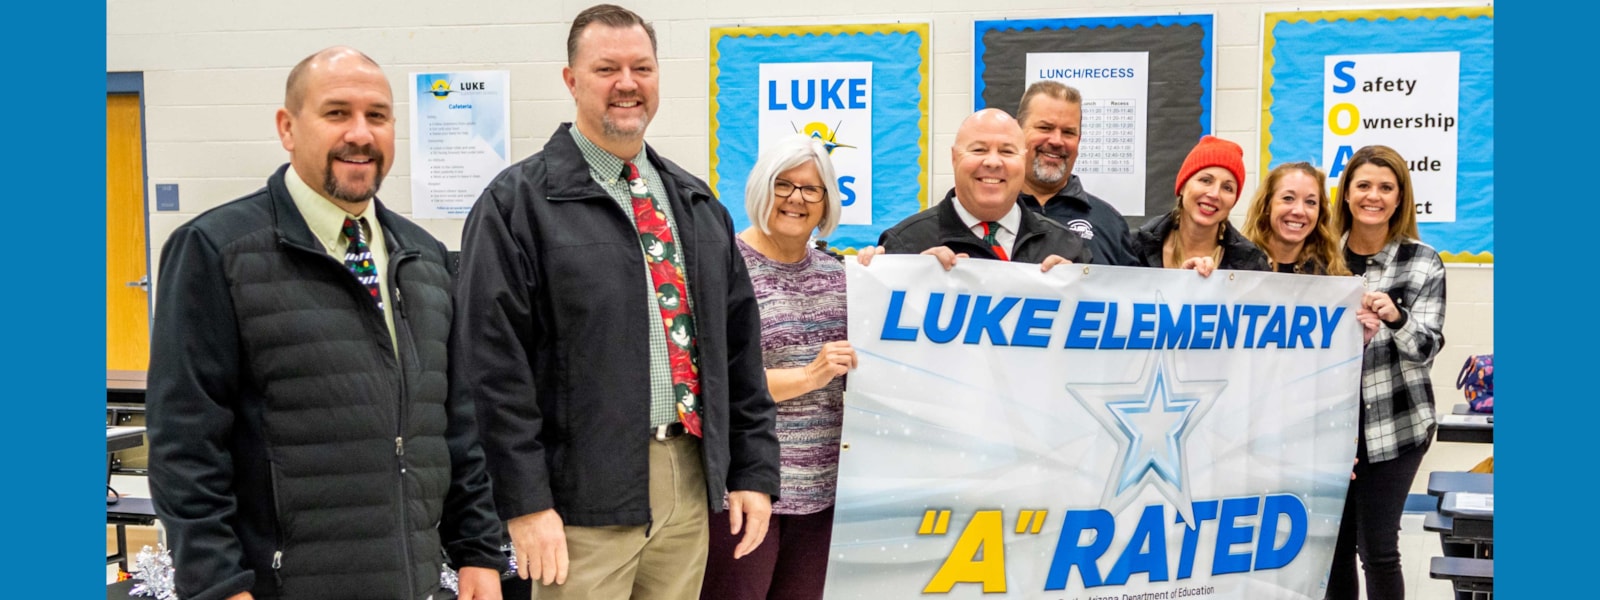 administrators with Luke "A" Rated Banner